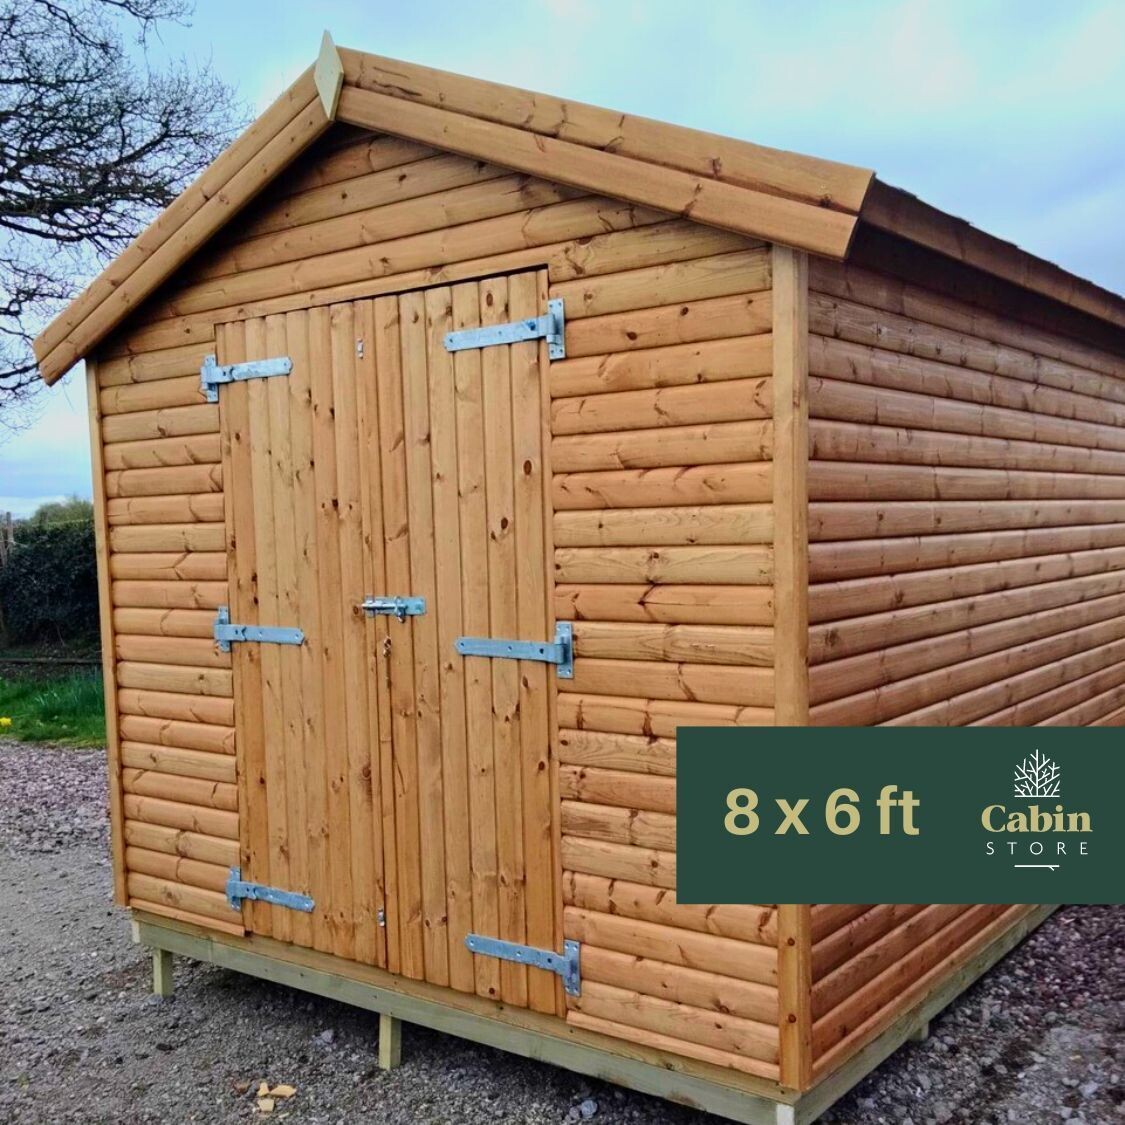 Super Heavy Duty Shed | 8x6ft